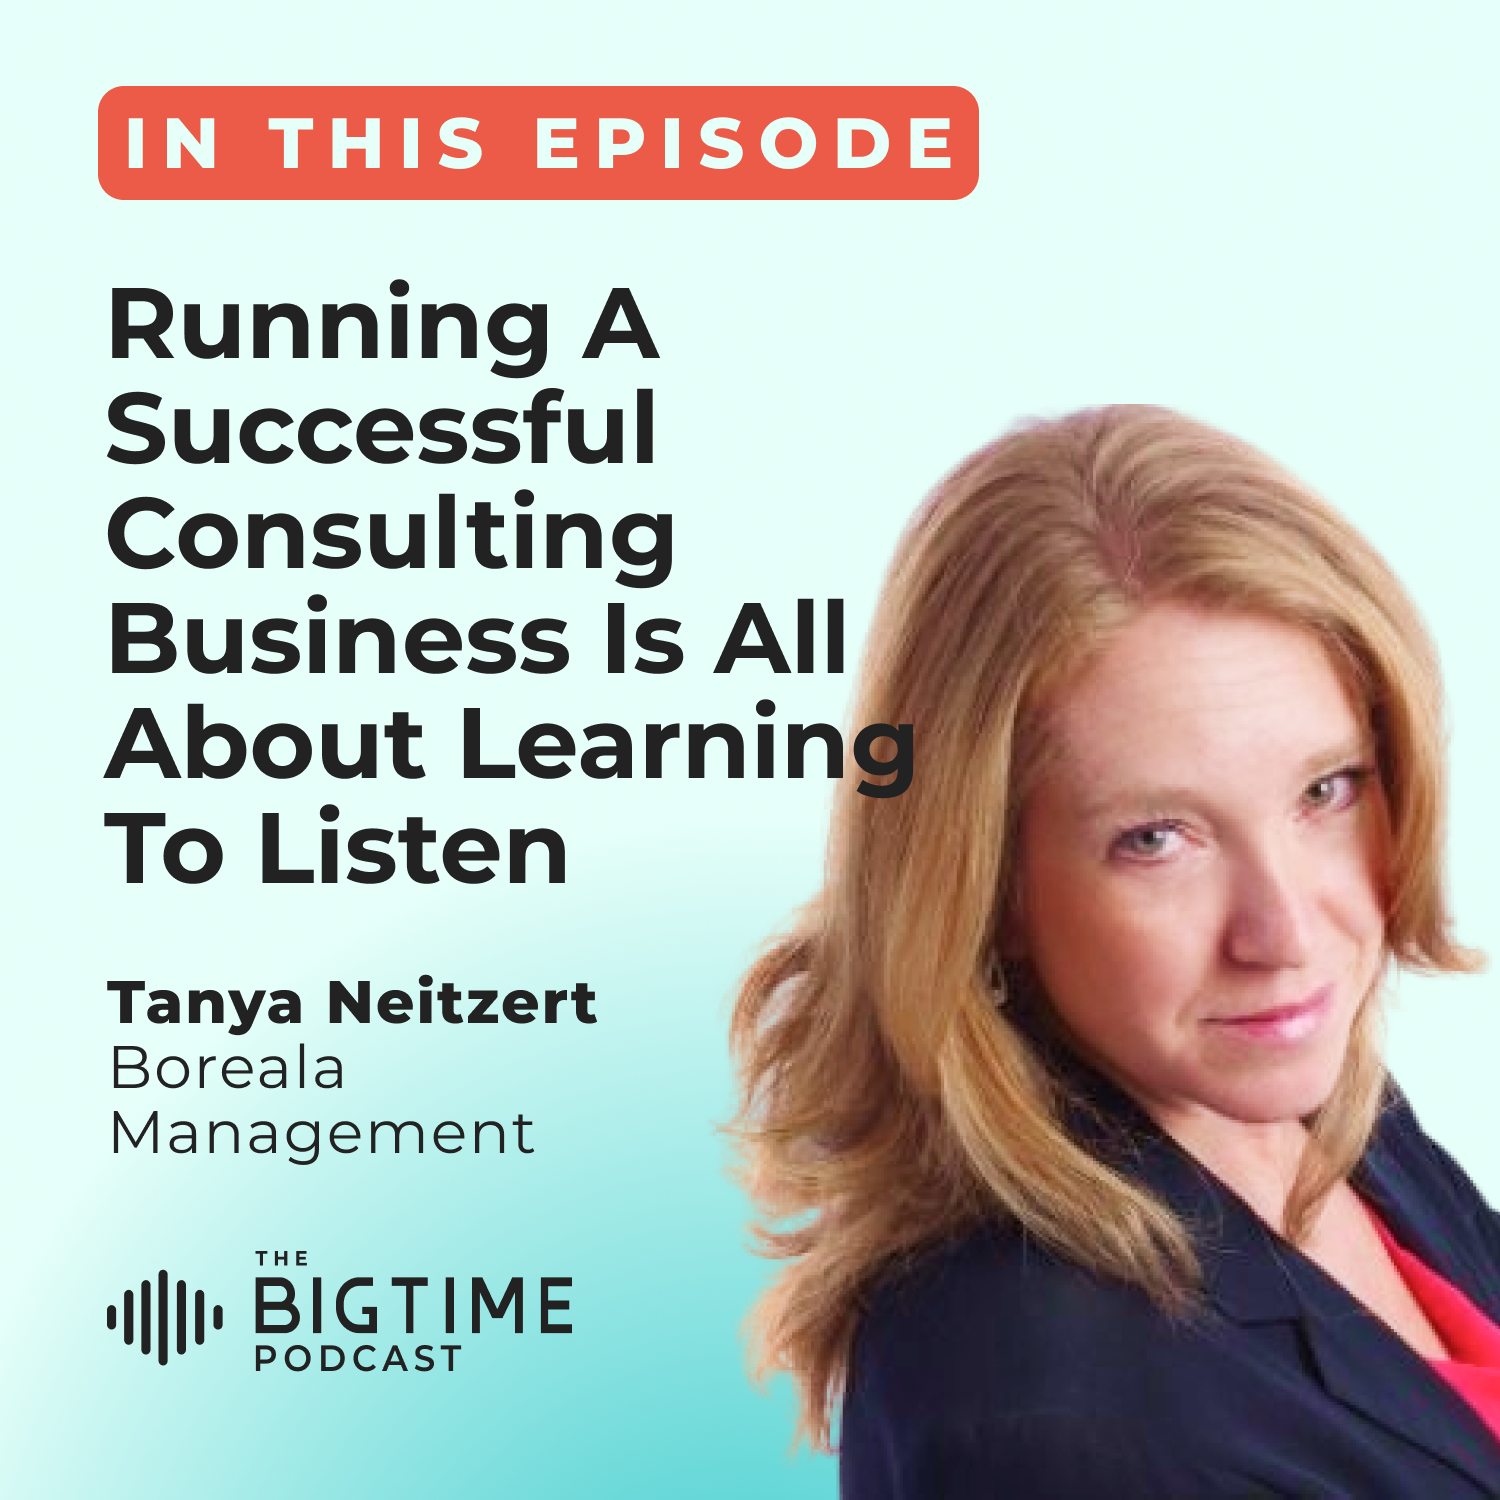 Running a Successful Consulting Business is All About Learning to Listen